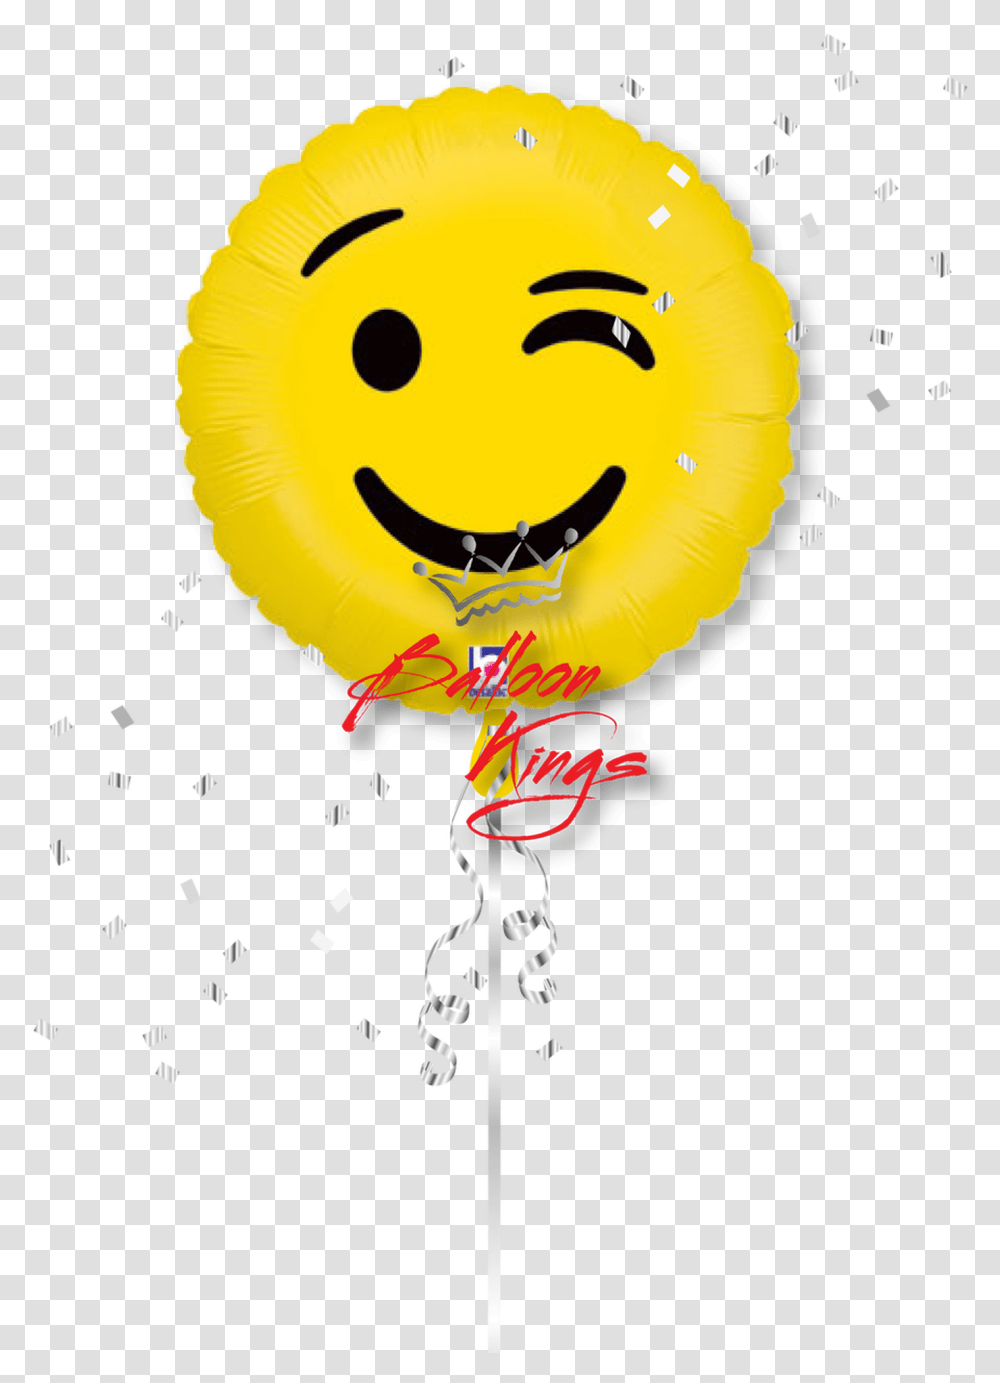 Emoji Wink Smiley Face Balloon, Graphics, Art, Toy Transparent Png